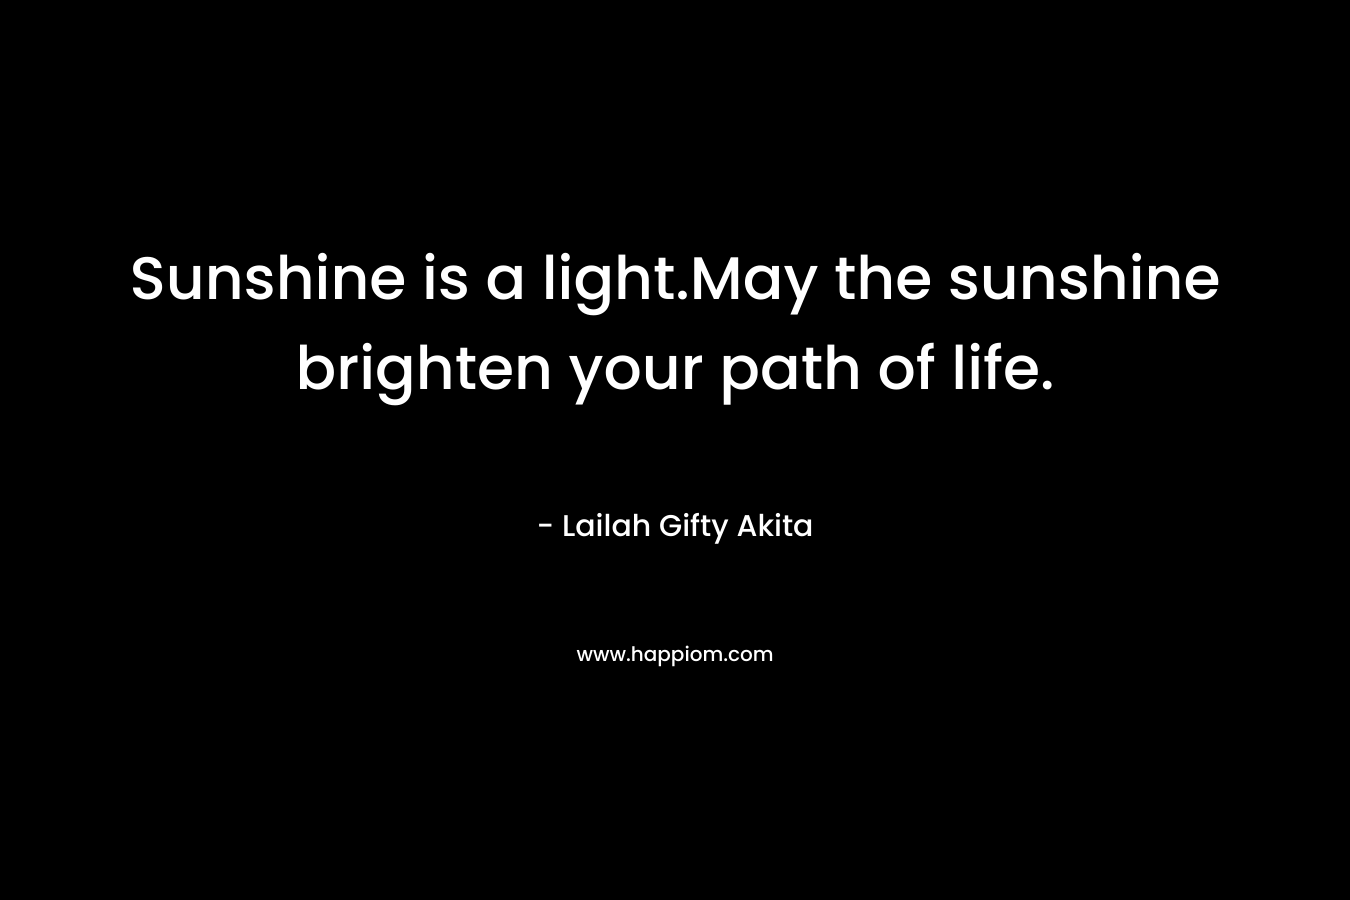 Sunshine is a light.May the sunshine brighten your path of life.